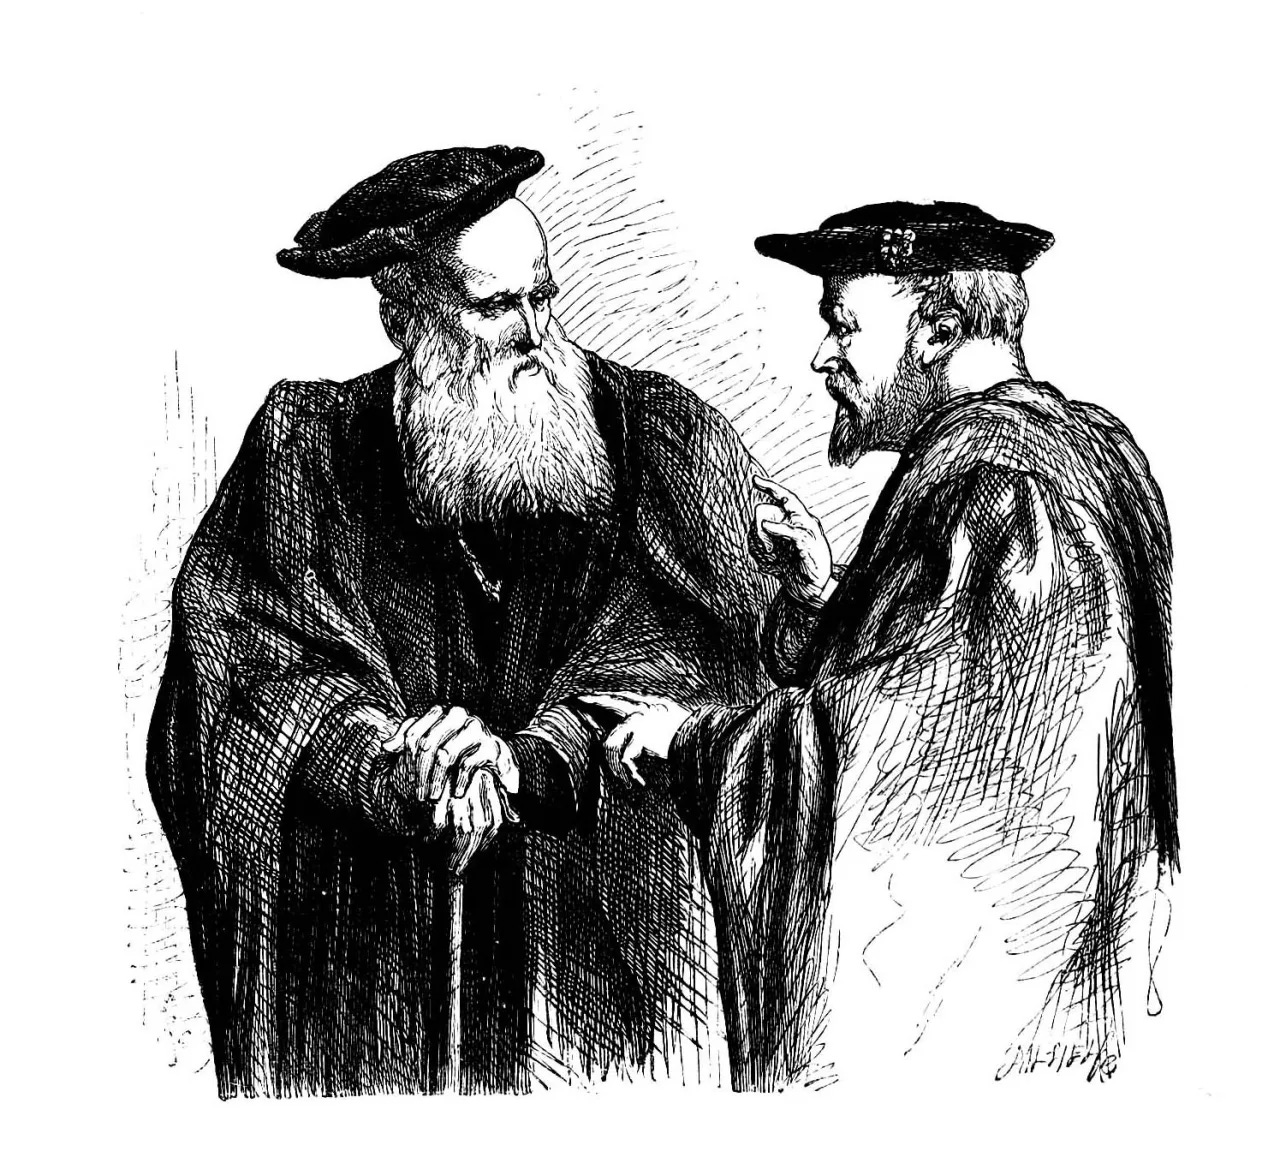 An engraving of two older men in conversation, wearing Renaissance robes and flatcaps